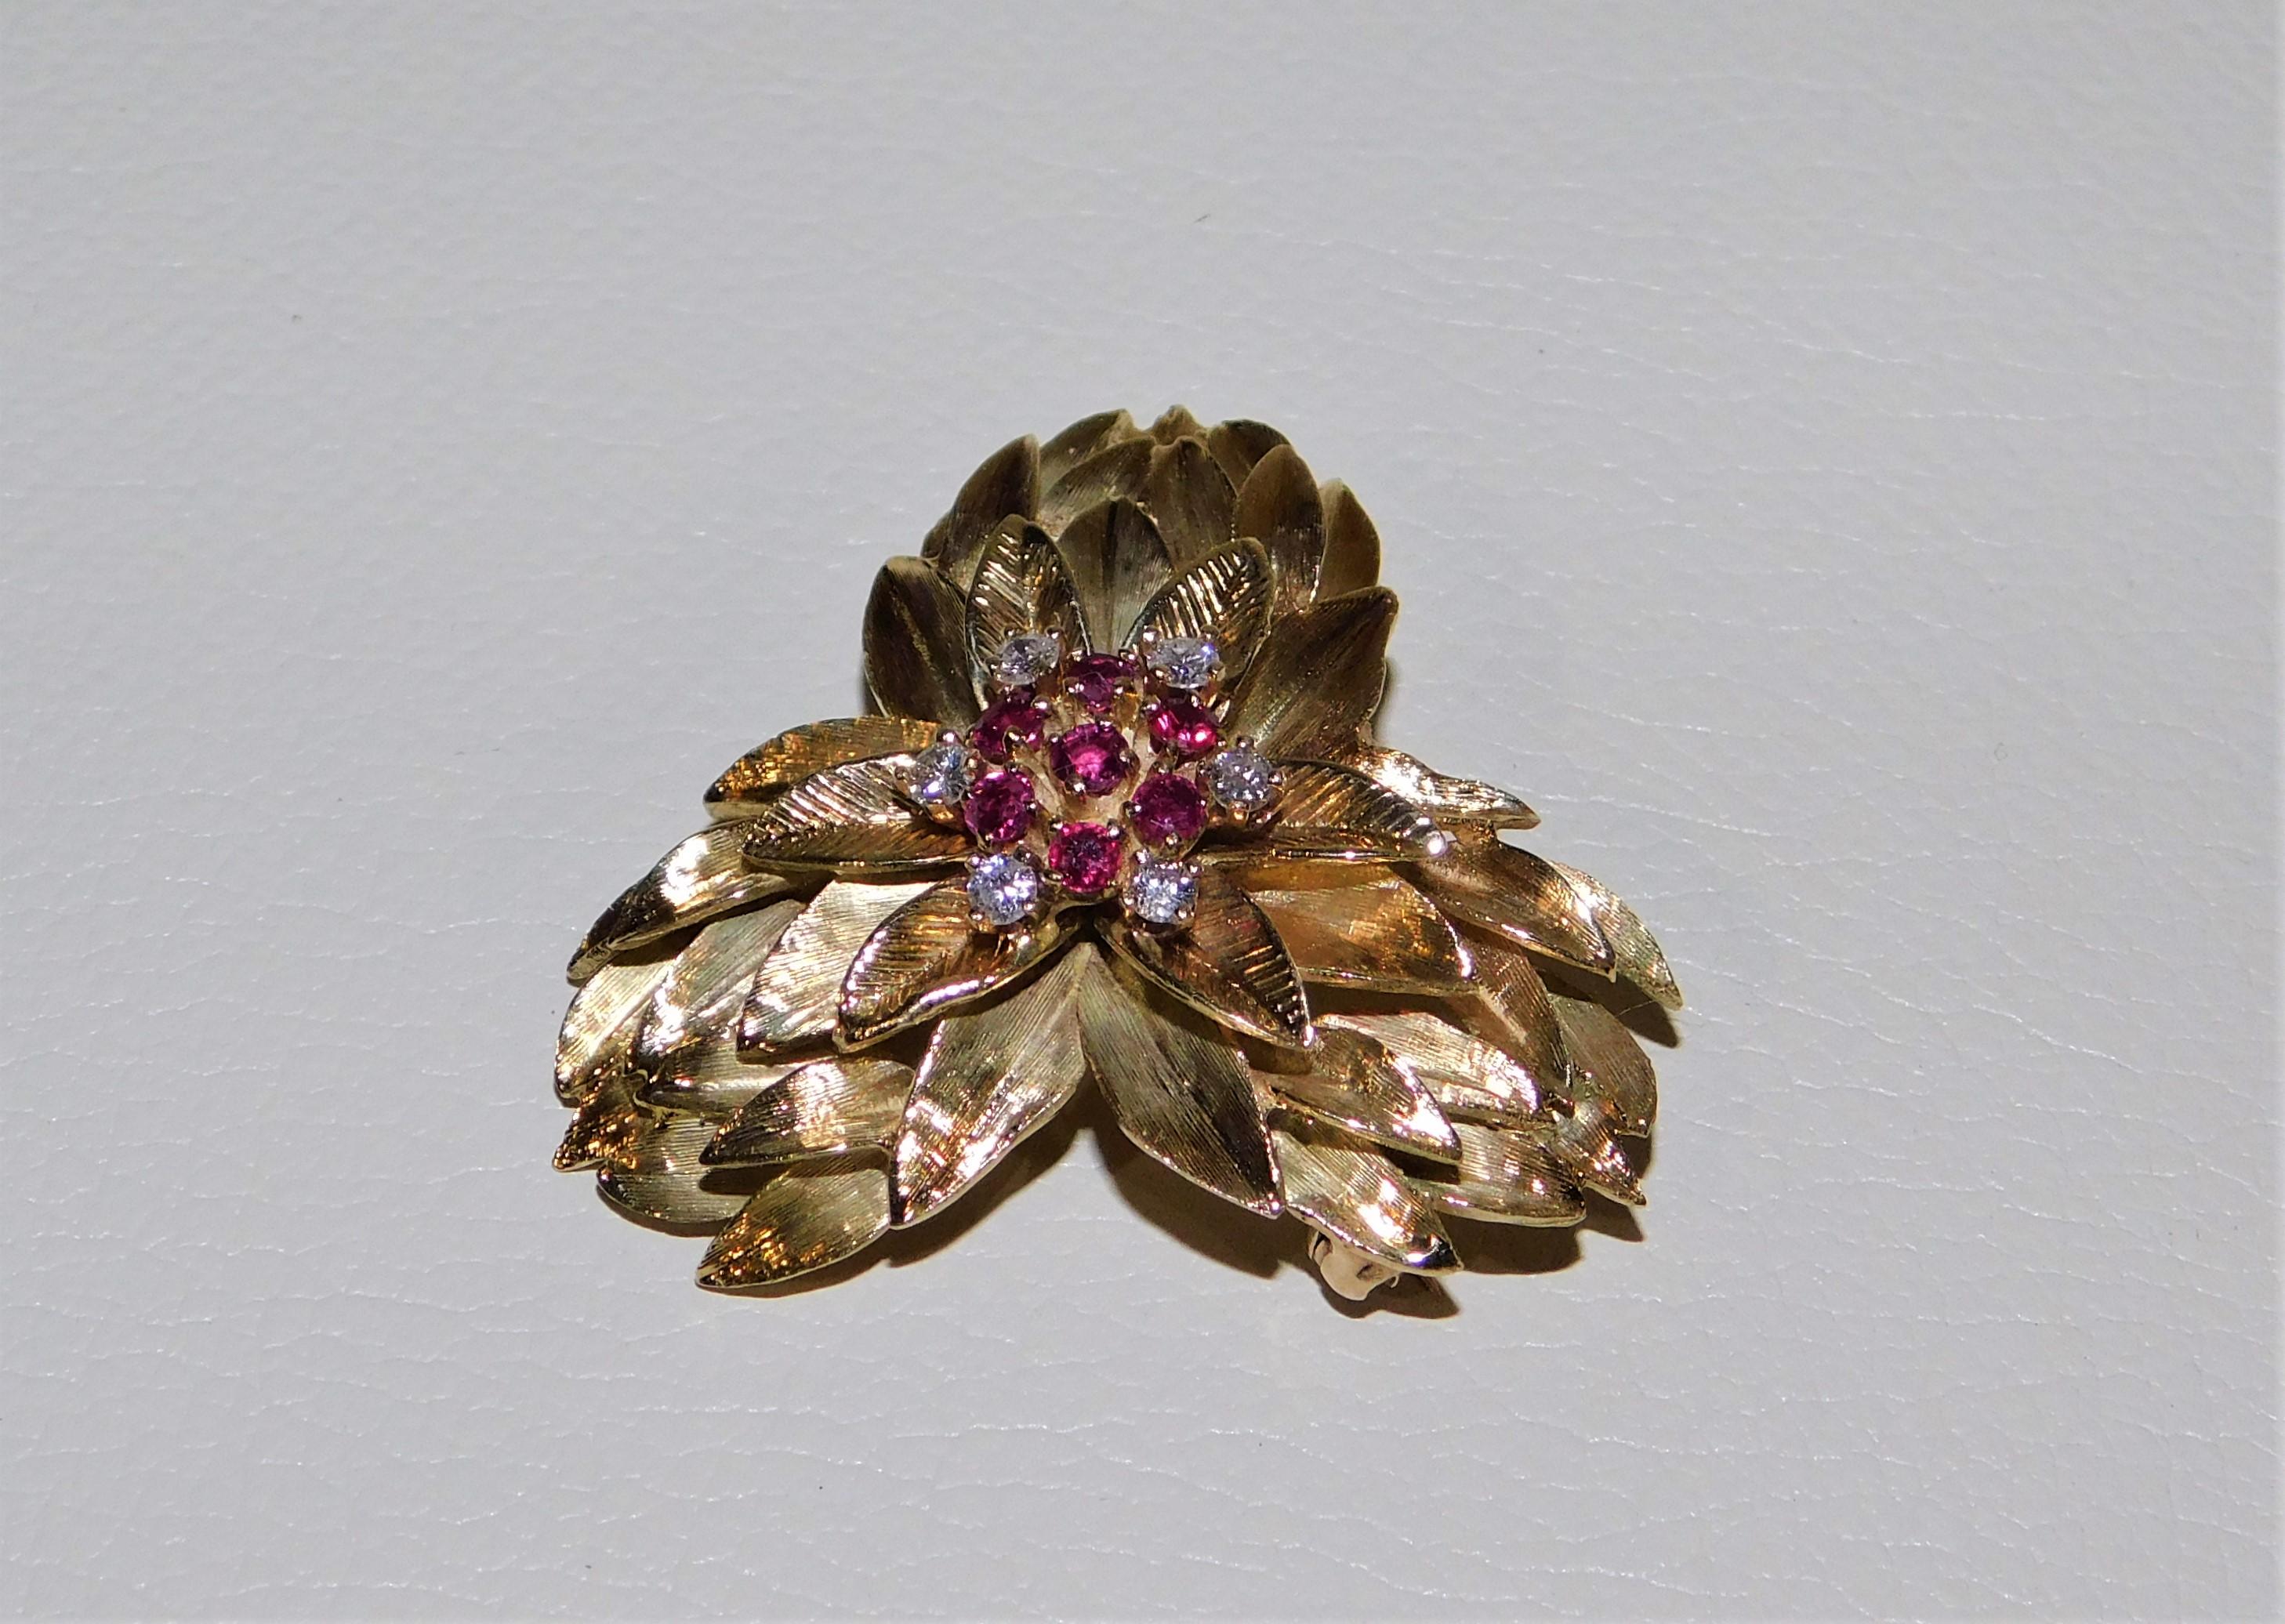 14K Gold Lady's Floral Design Brooch/Pendant with Cut 7 Rubies and 6 Diamonds For Sale 1